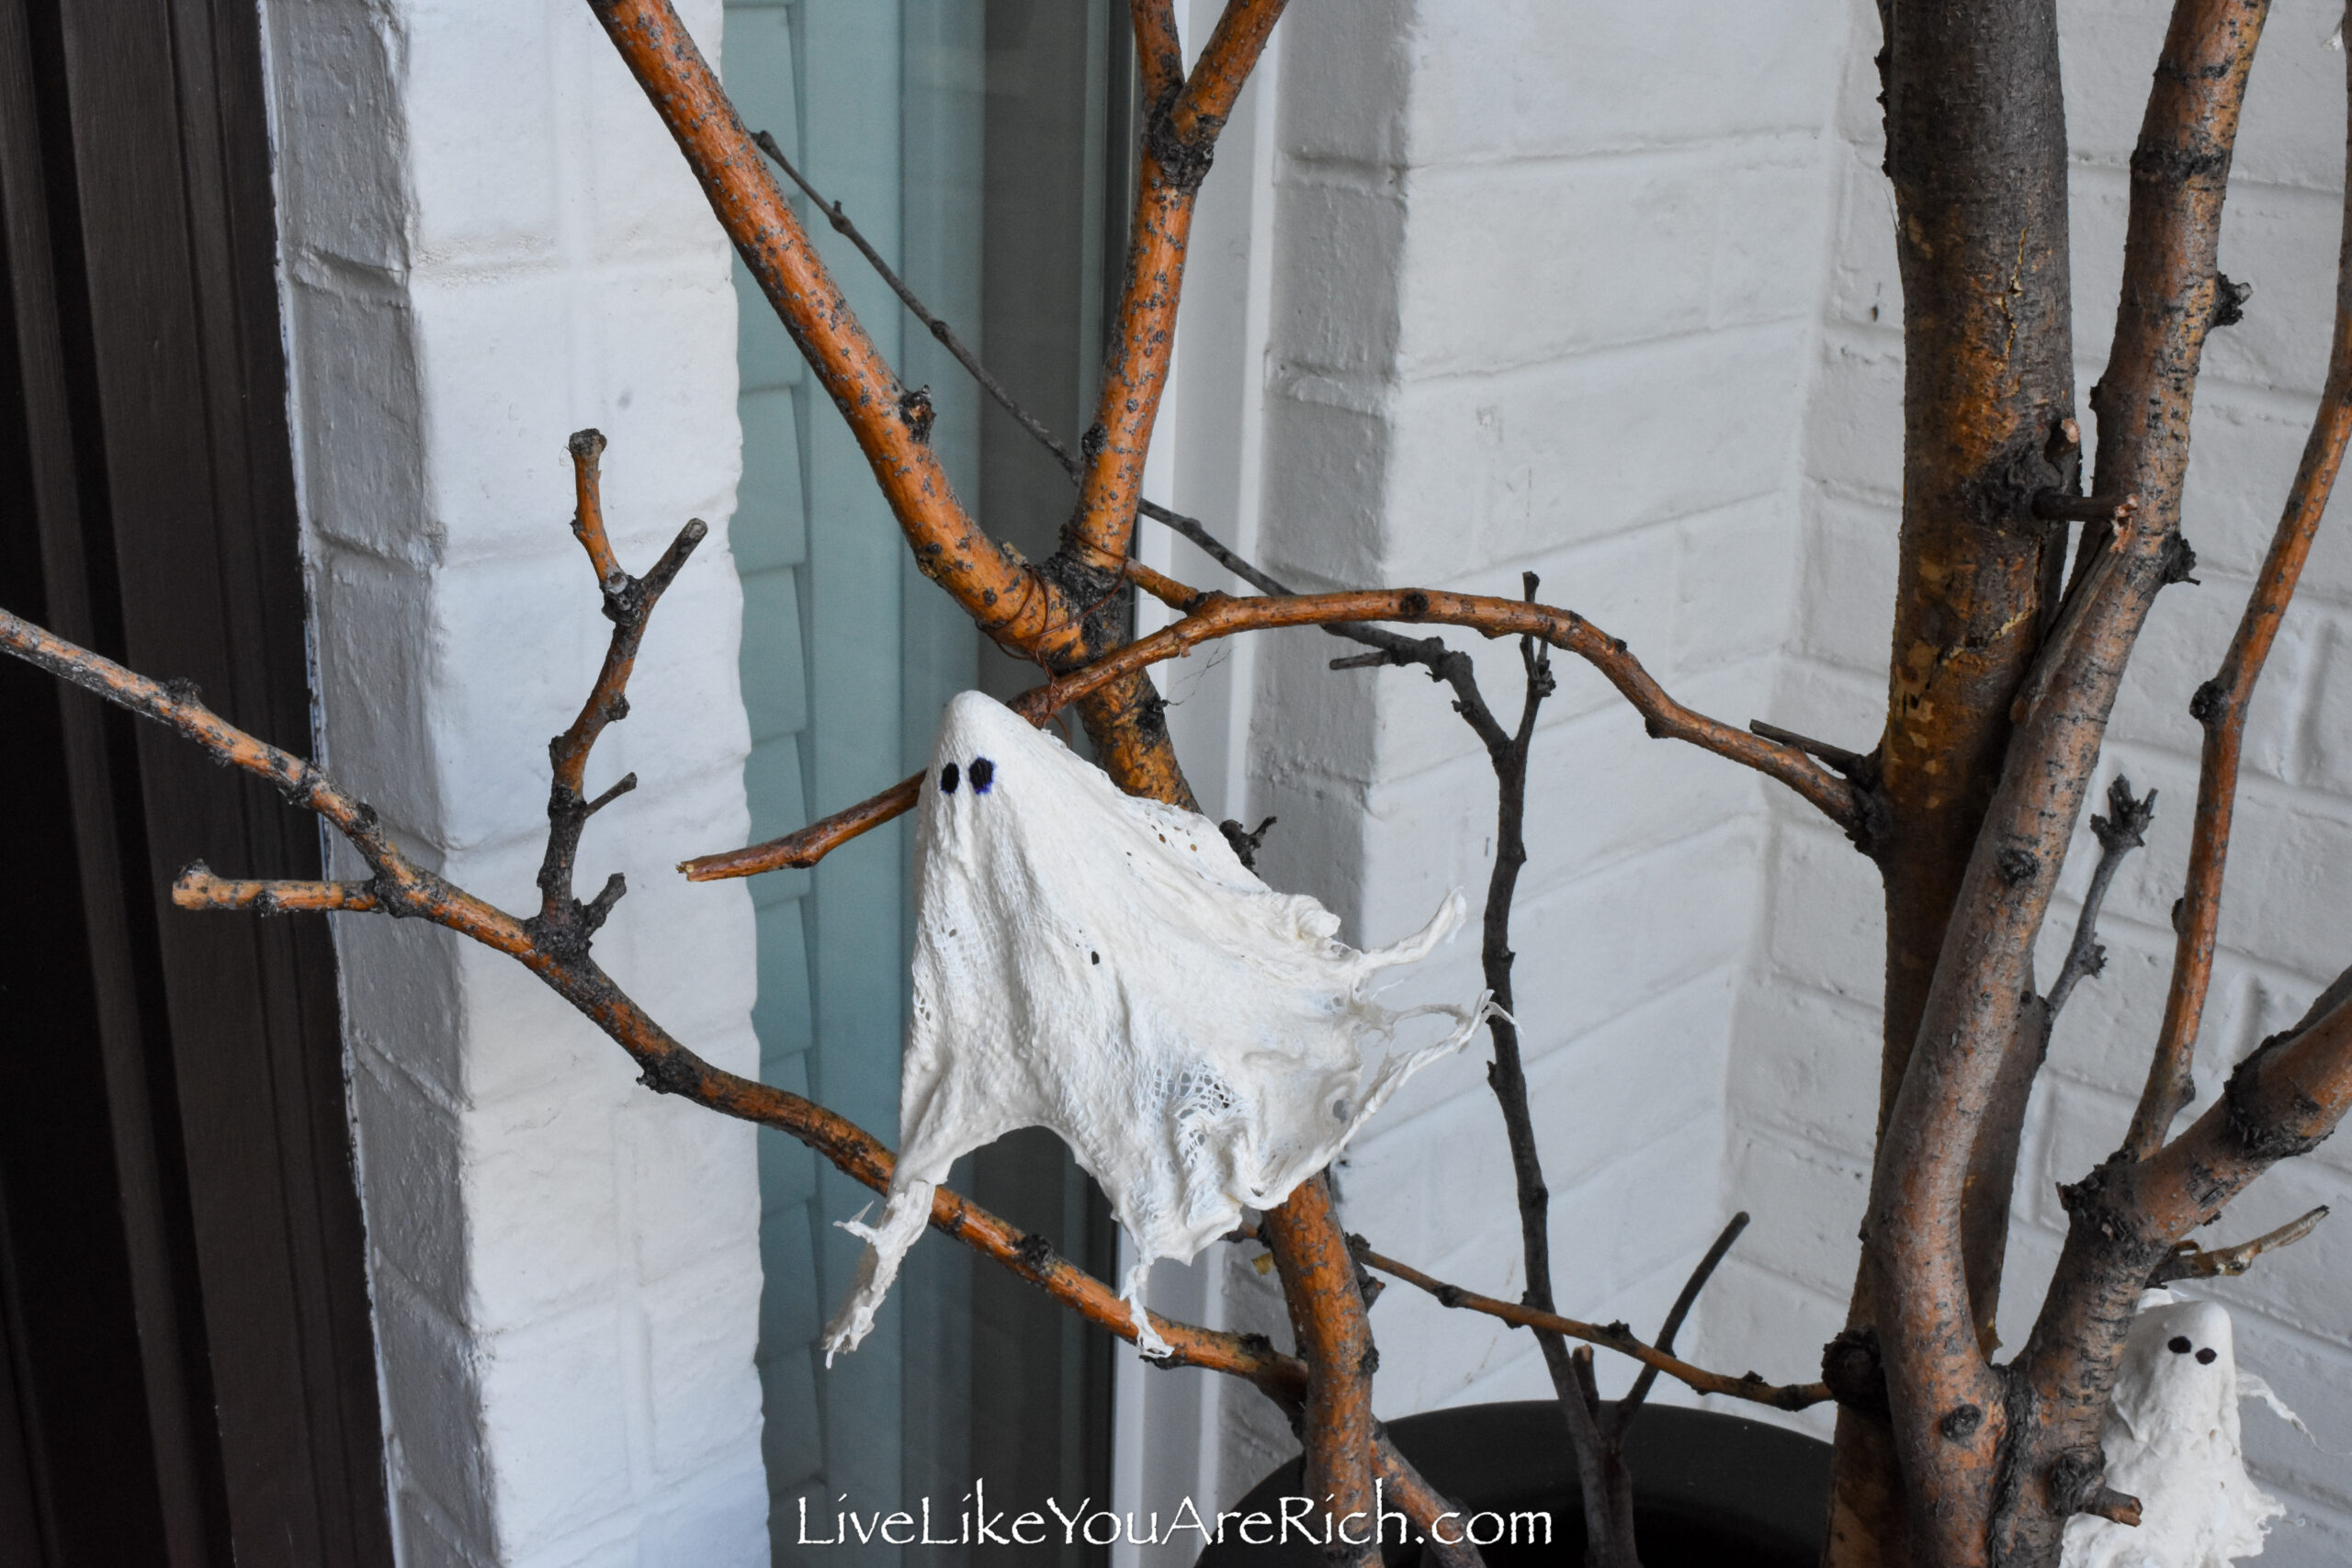 Haunted House & Ghost Outdoor Halloween Decorations